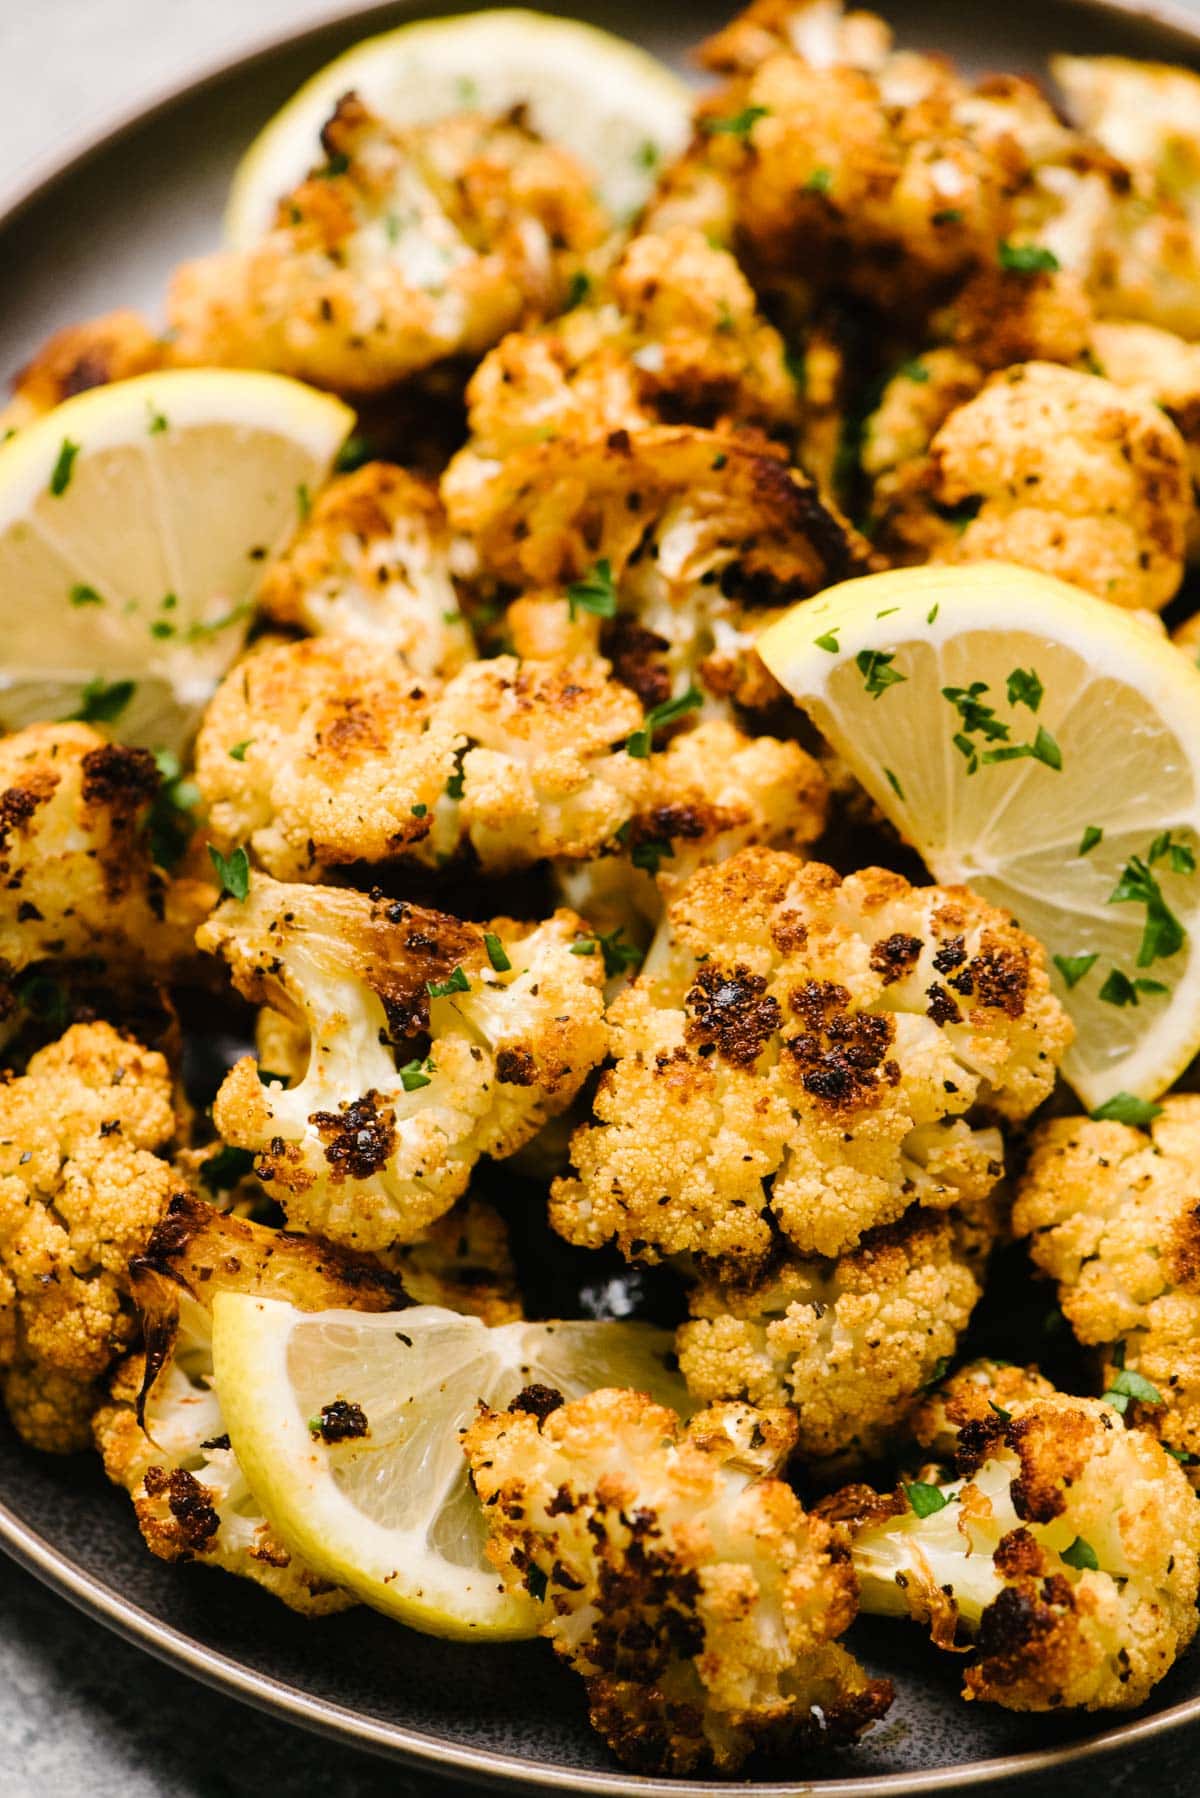 Side view, roasted cauliflower on a black plate garnished with lemon wedges and fresh minced parsley.